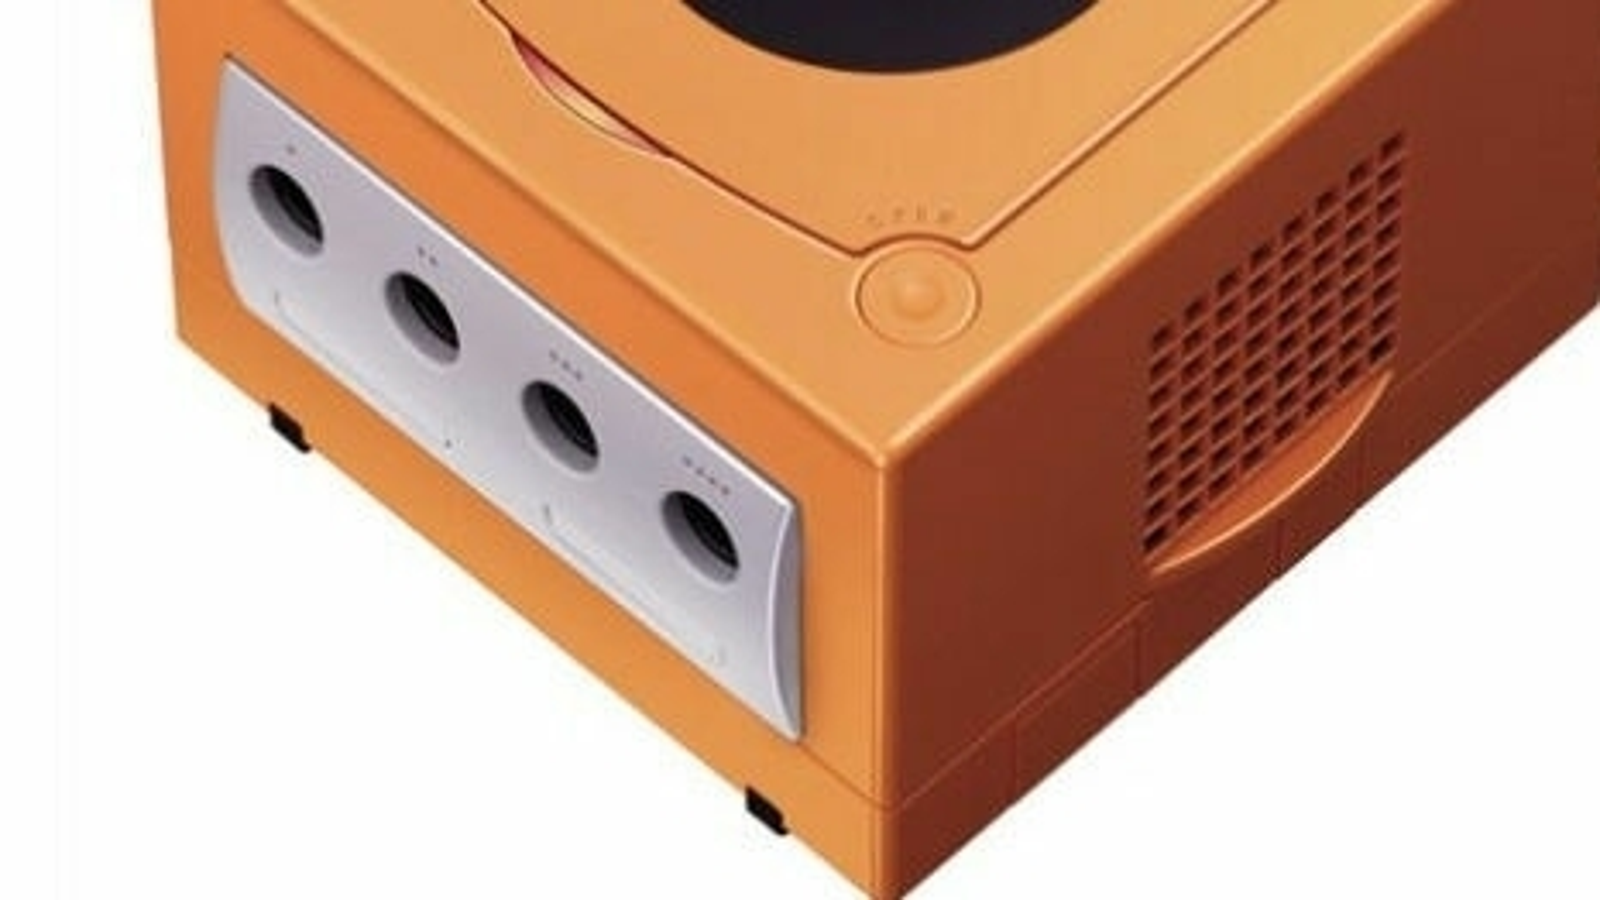 How to Play GameCube Games on the Wii • VGLeaks 3.0 • The best video game  rumors and leaks